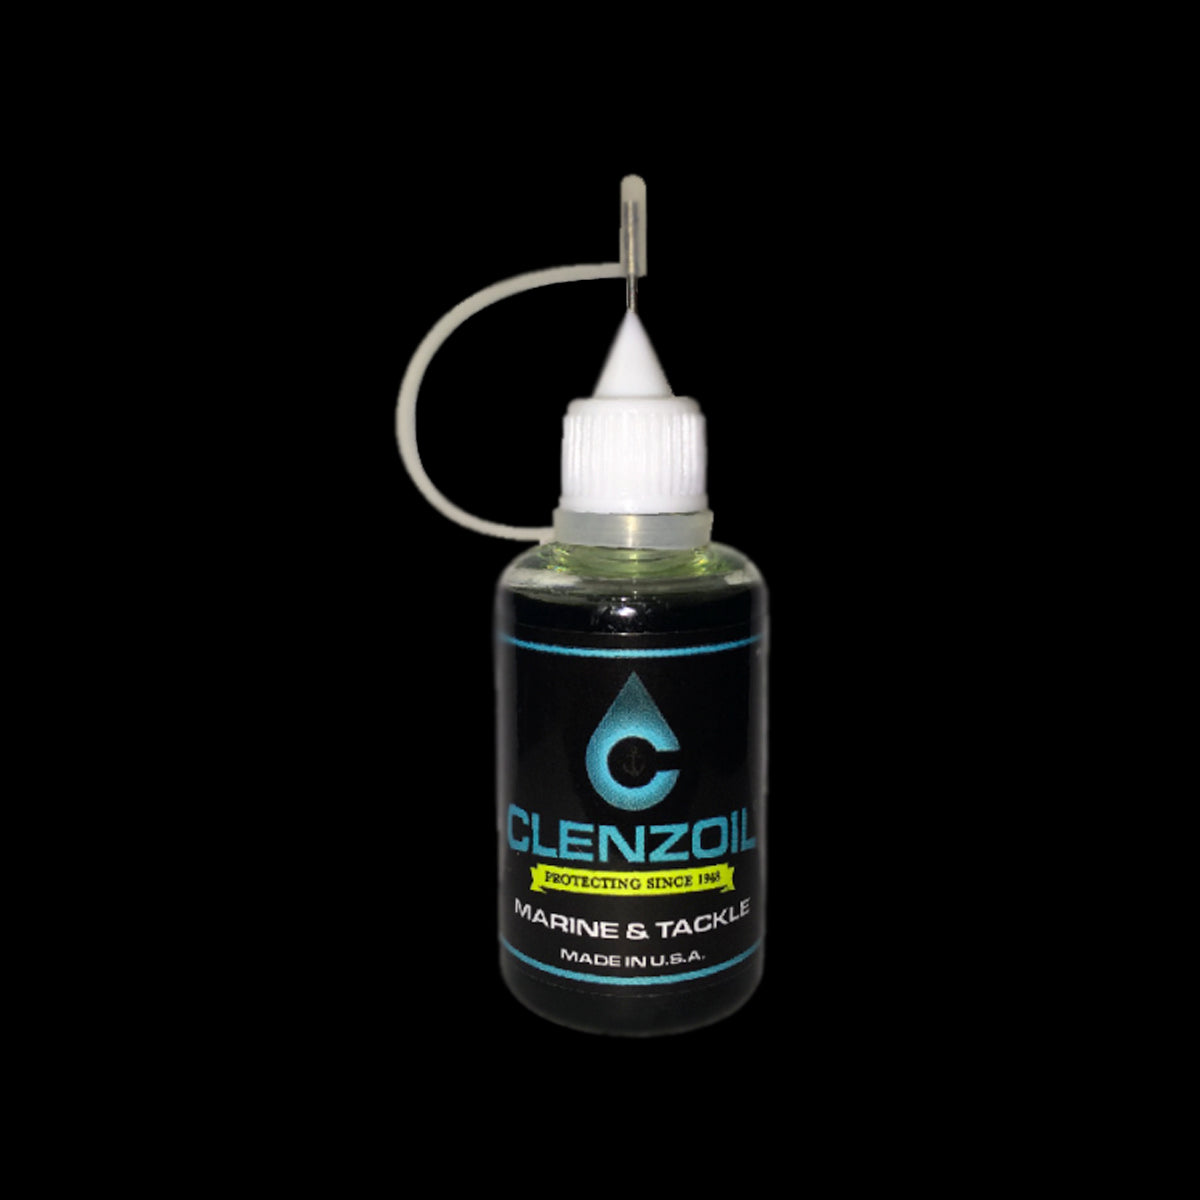 Clenzoil Marine & Tackle – Needle Oiler – Florida Fishing Products